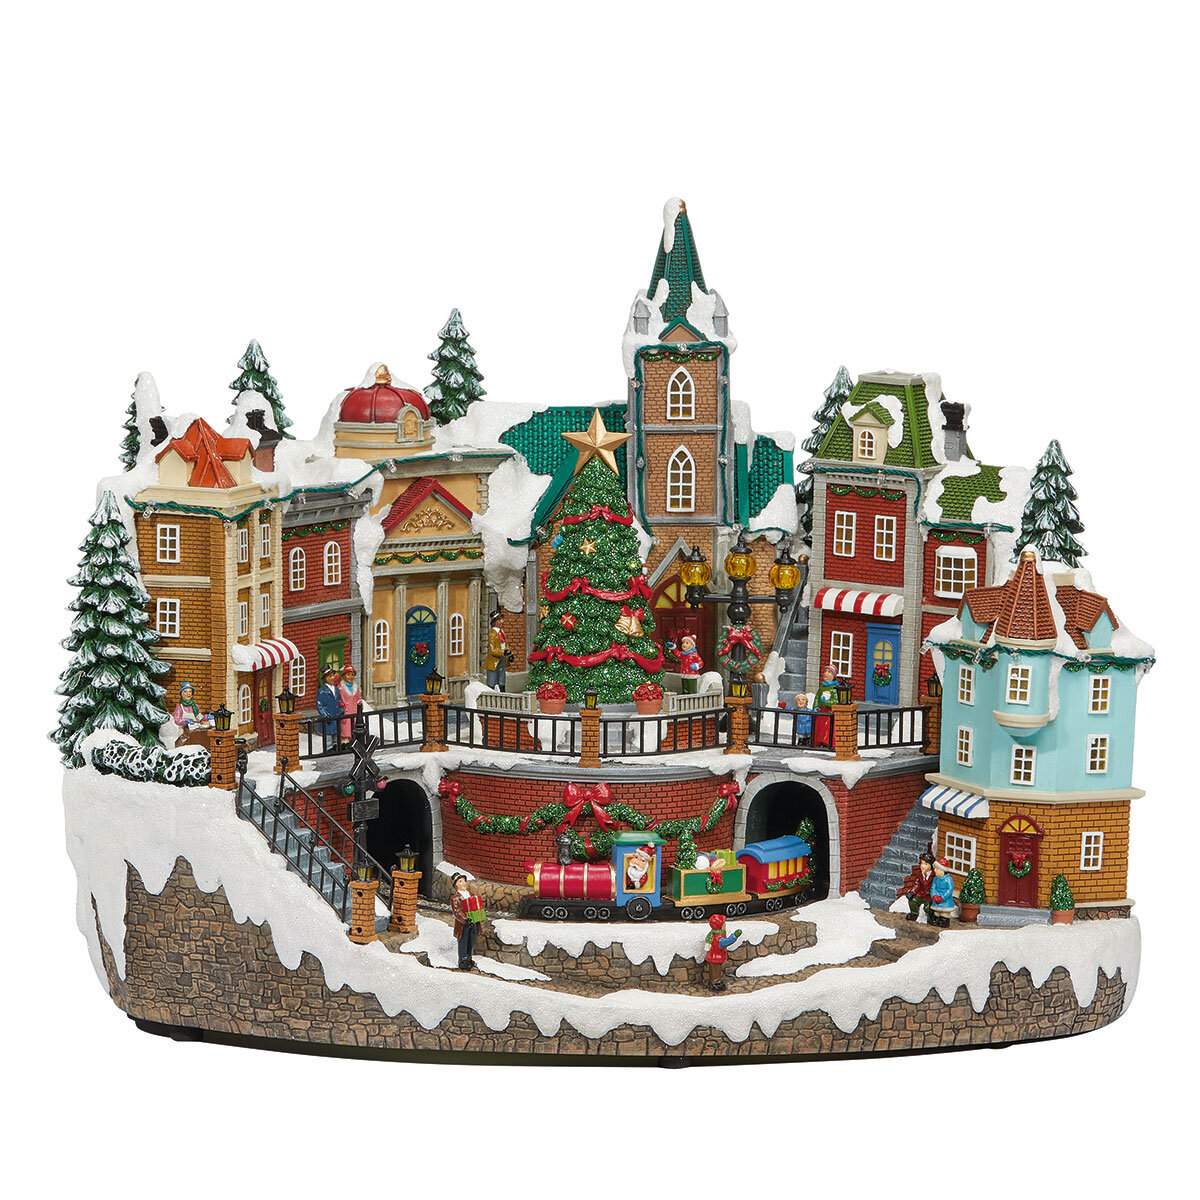 Buy Snowy Holiday Village Overview Image at Costco.co.uk